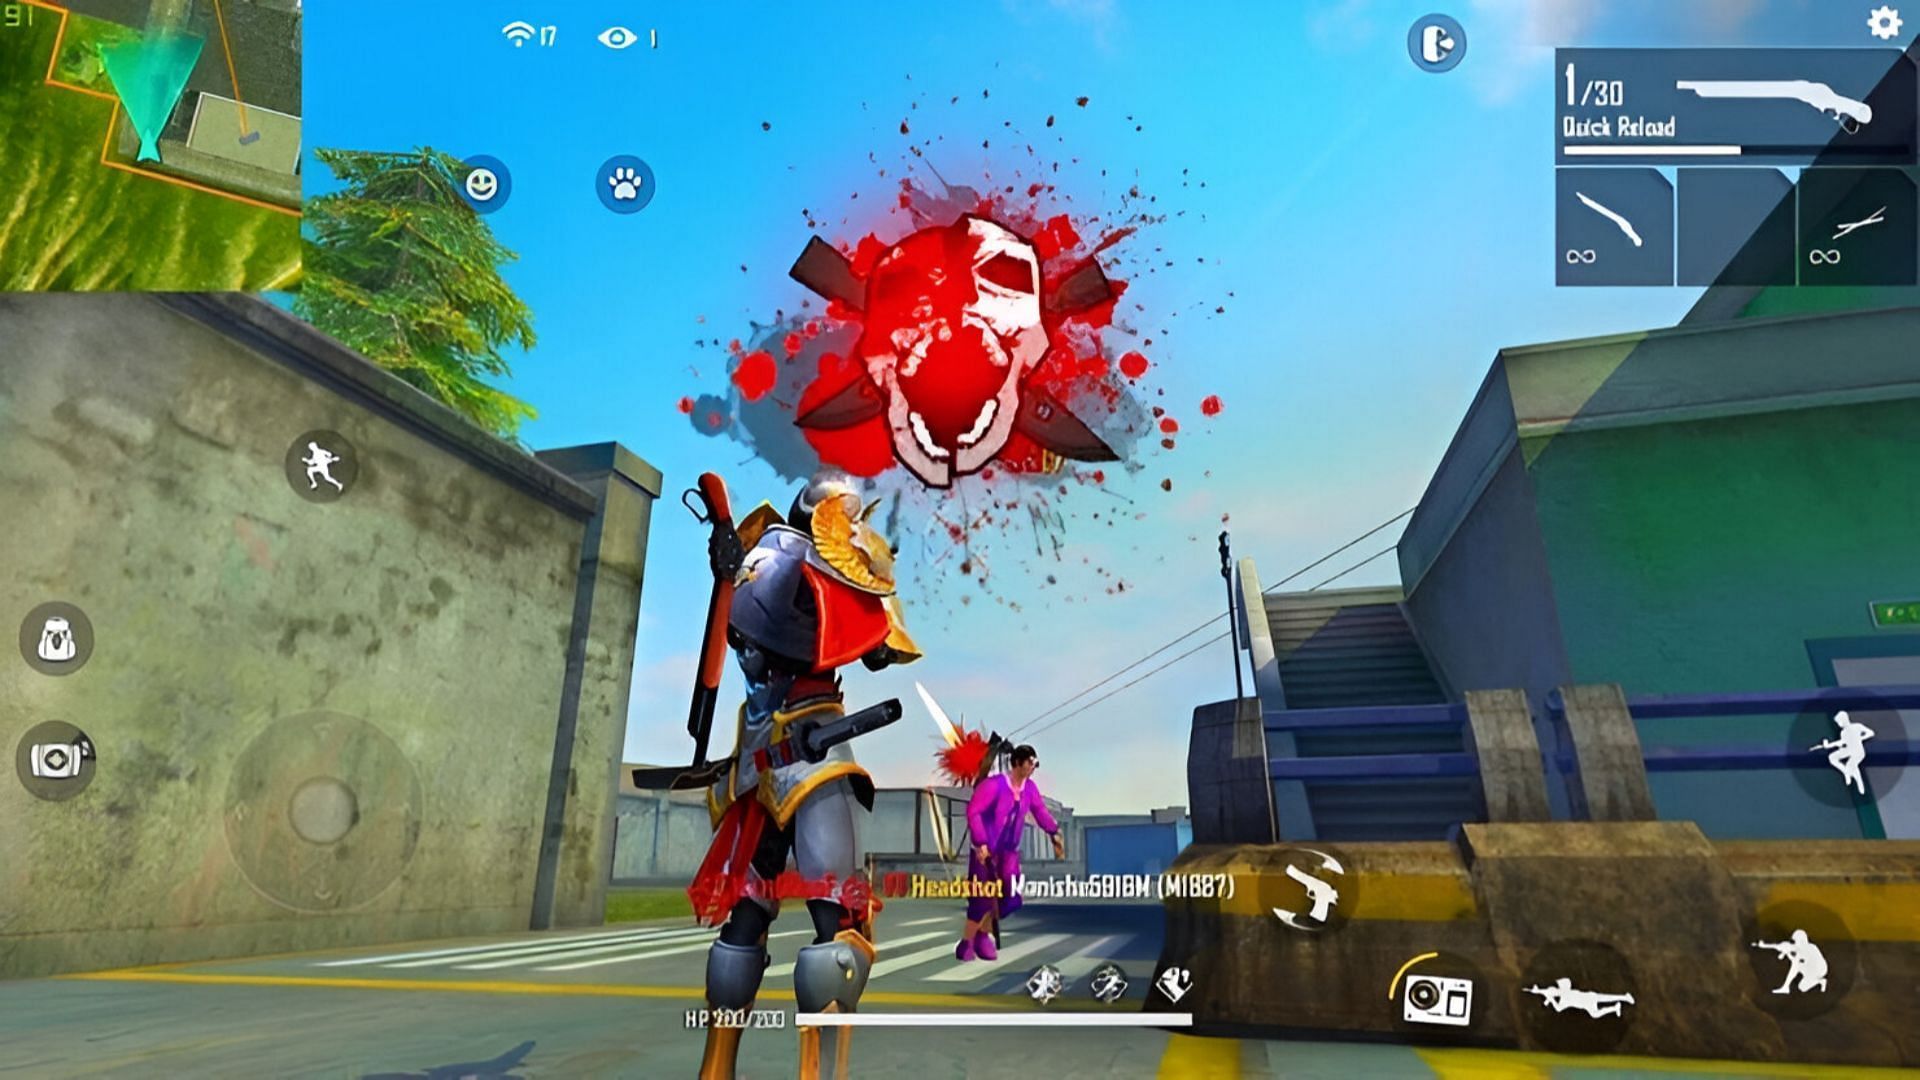 Play Garena Free Fire like a Pro! Get 100% headshot accuracy with this one  trick